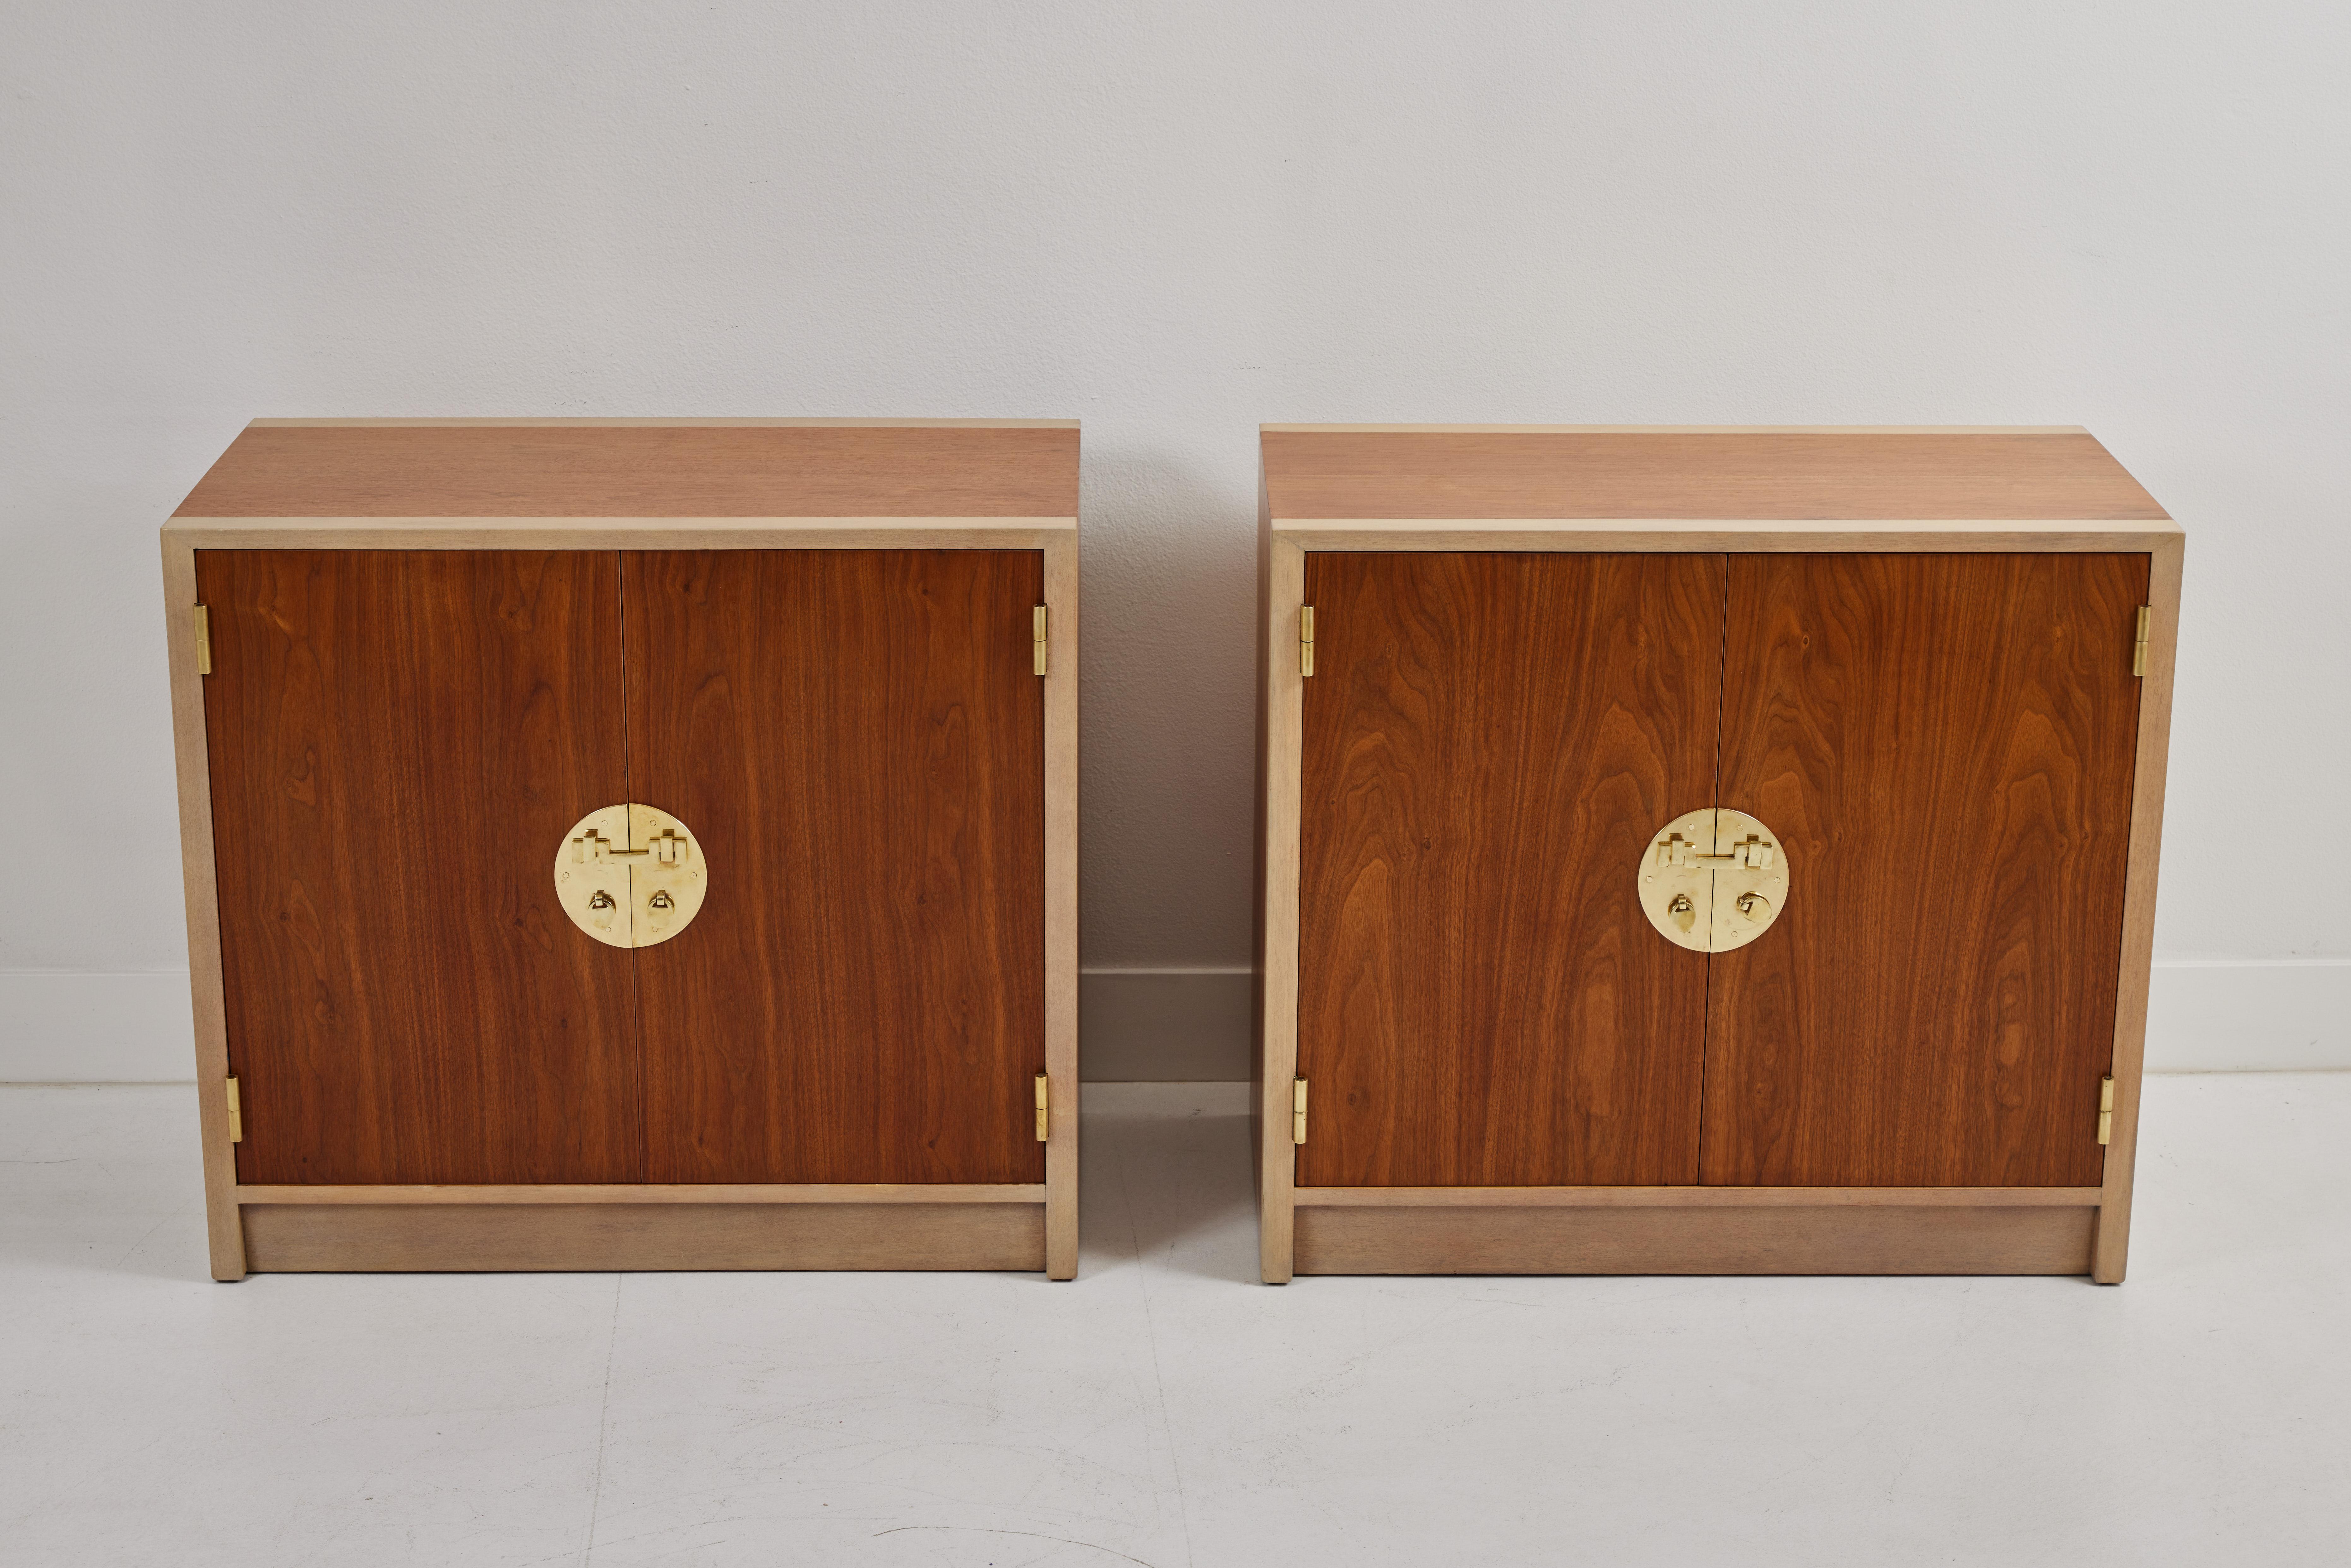 This pair of Dunbar cabinets were designed by Edward Wormley. The have been refinished beautifully to include a 2